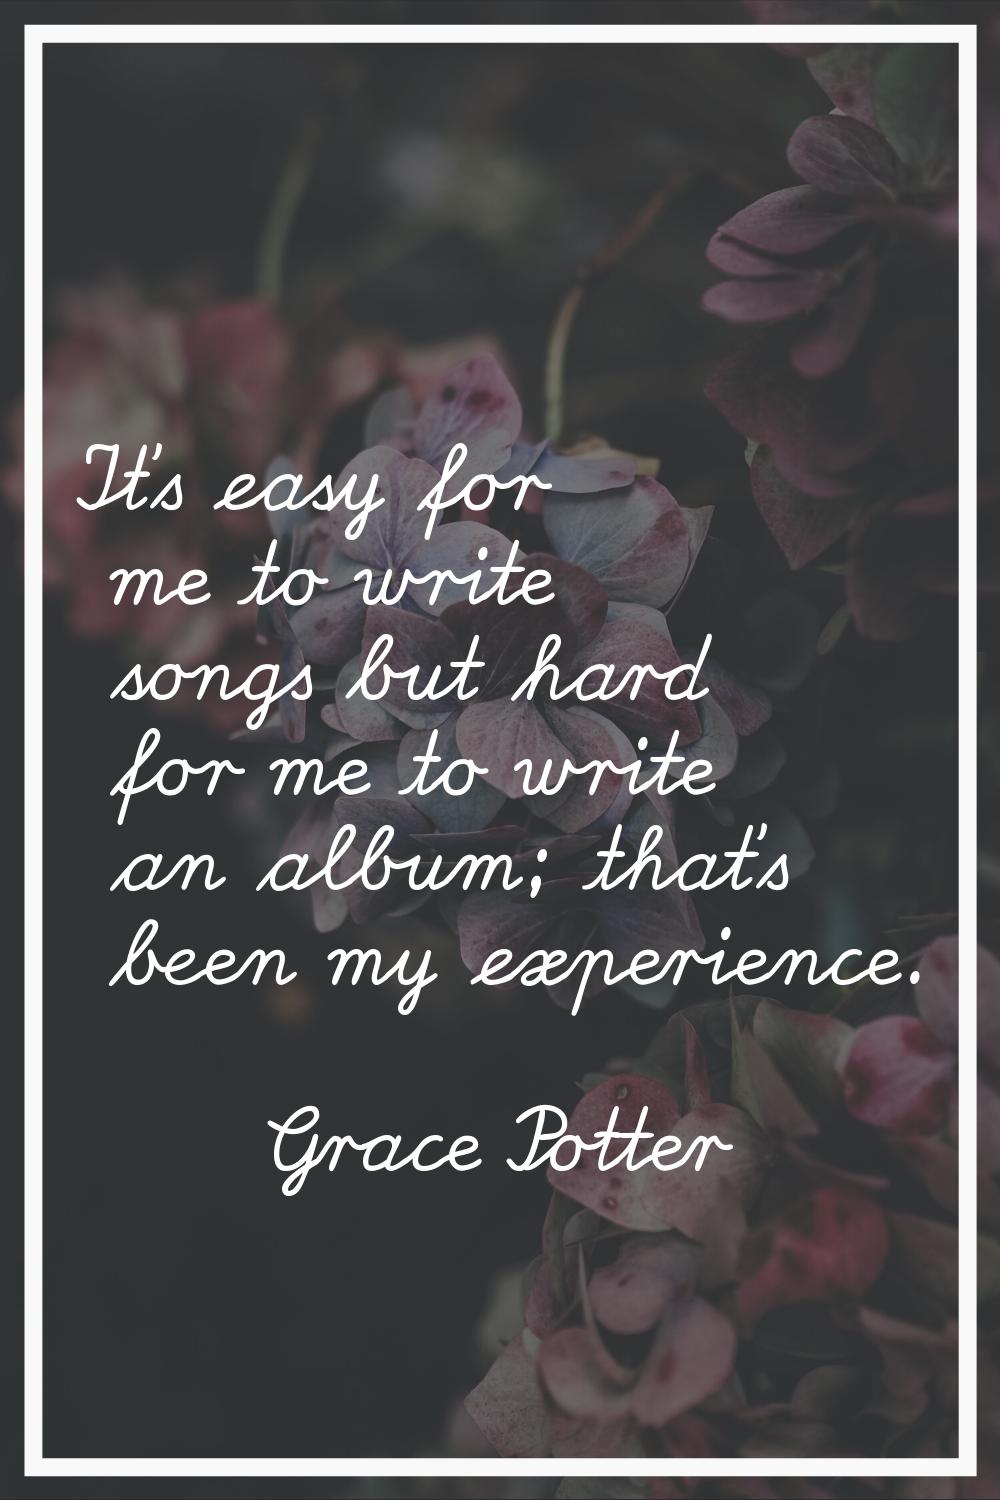 It's easy for me to write songs but hard for me to write an album; that's been my experience.